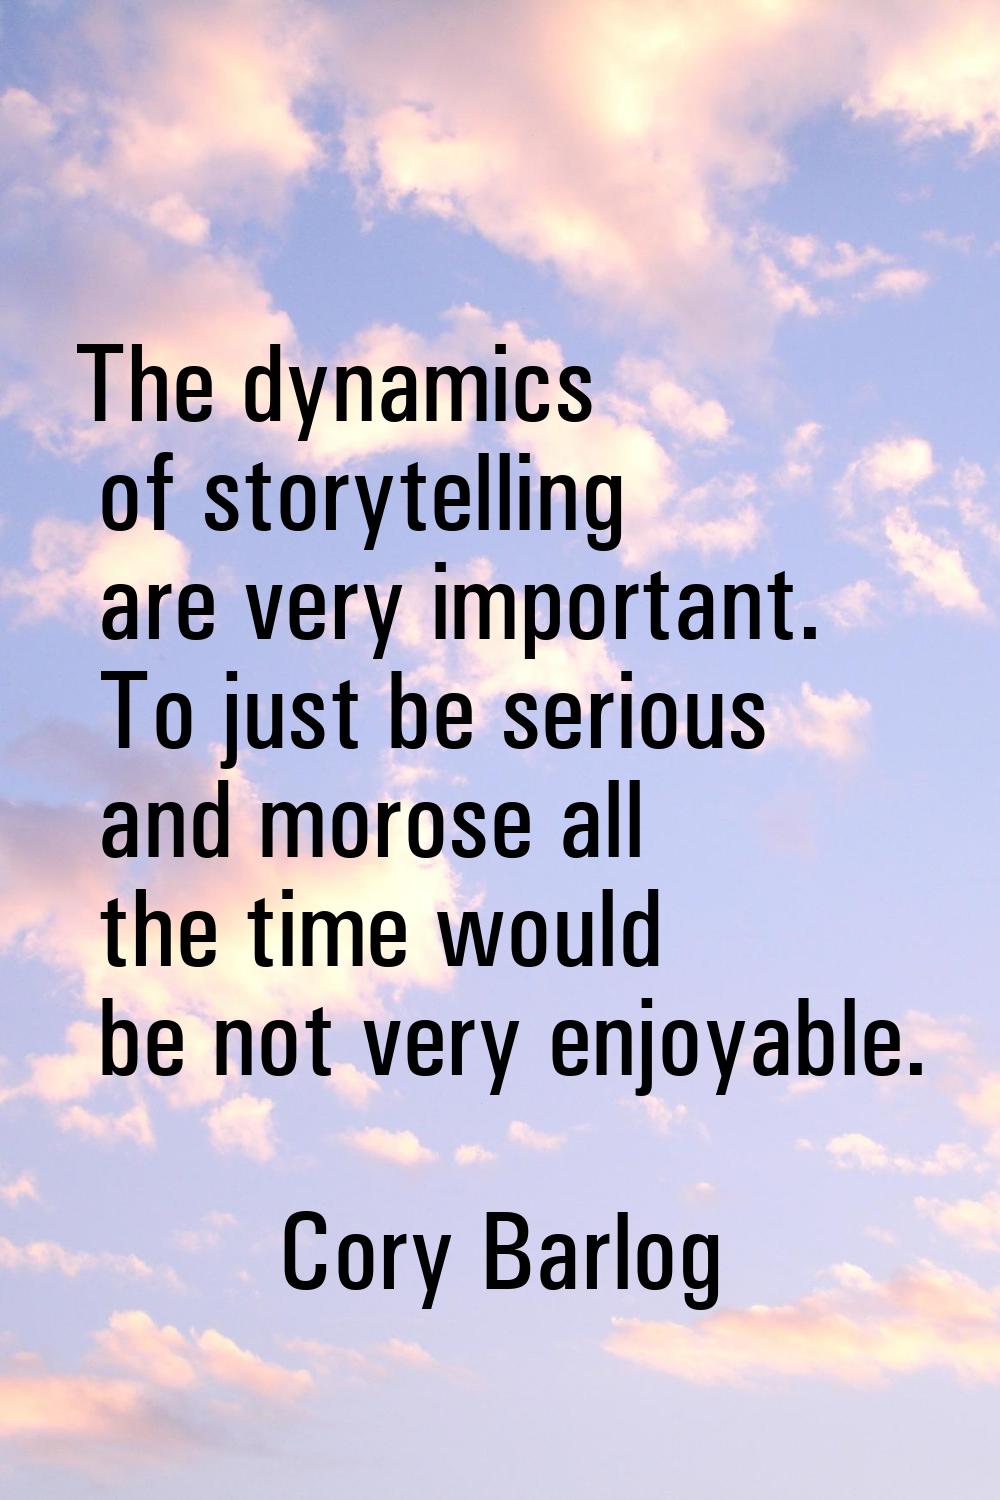 The dynamics of storytelling are very important. To just be serious and morose all the time would b